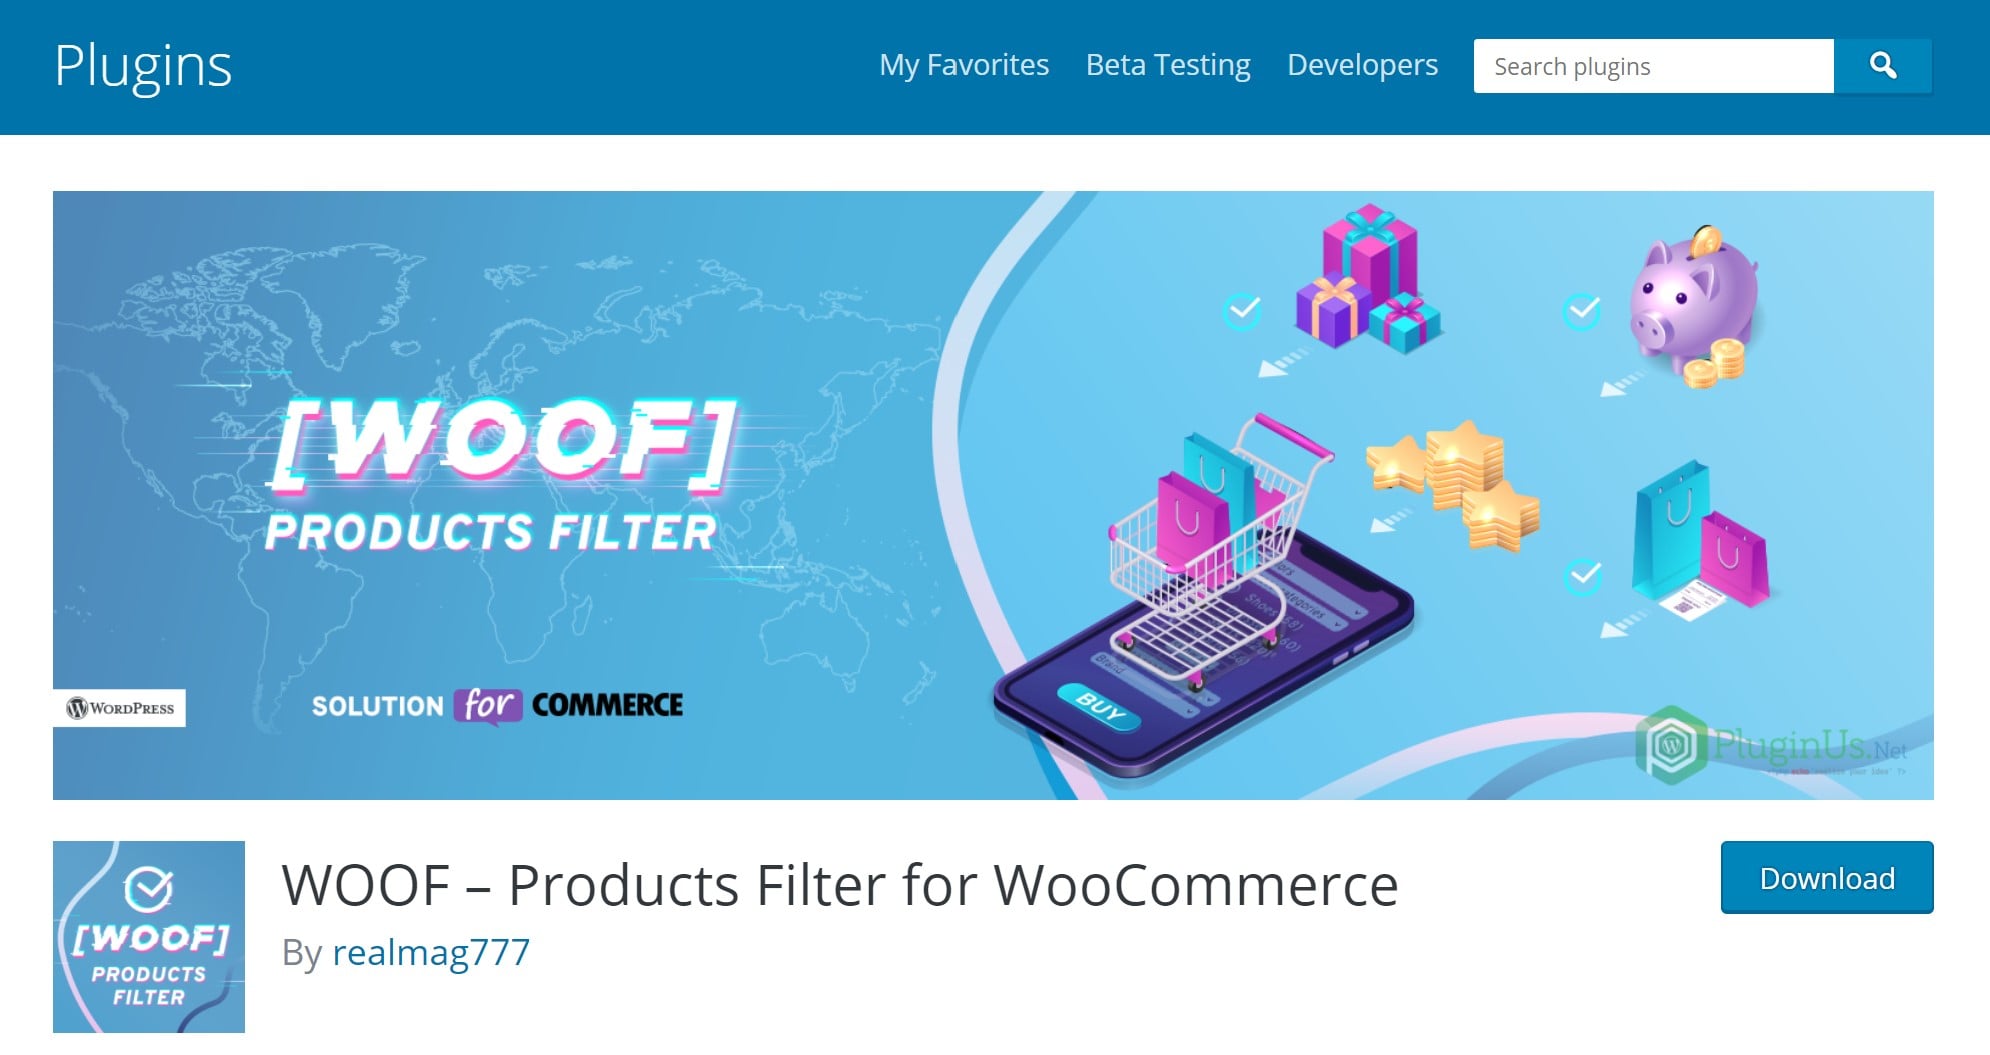 WOOF – Products Filter for WooCommerce